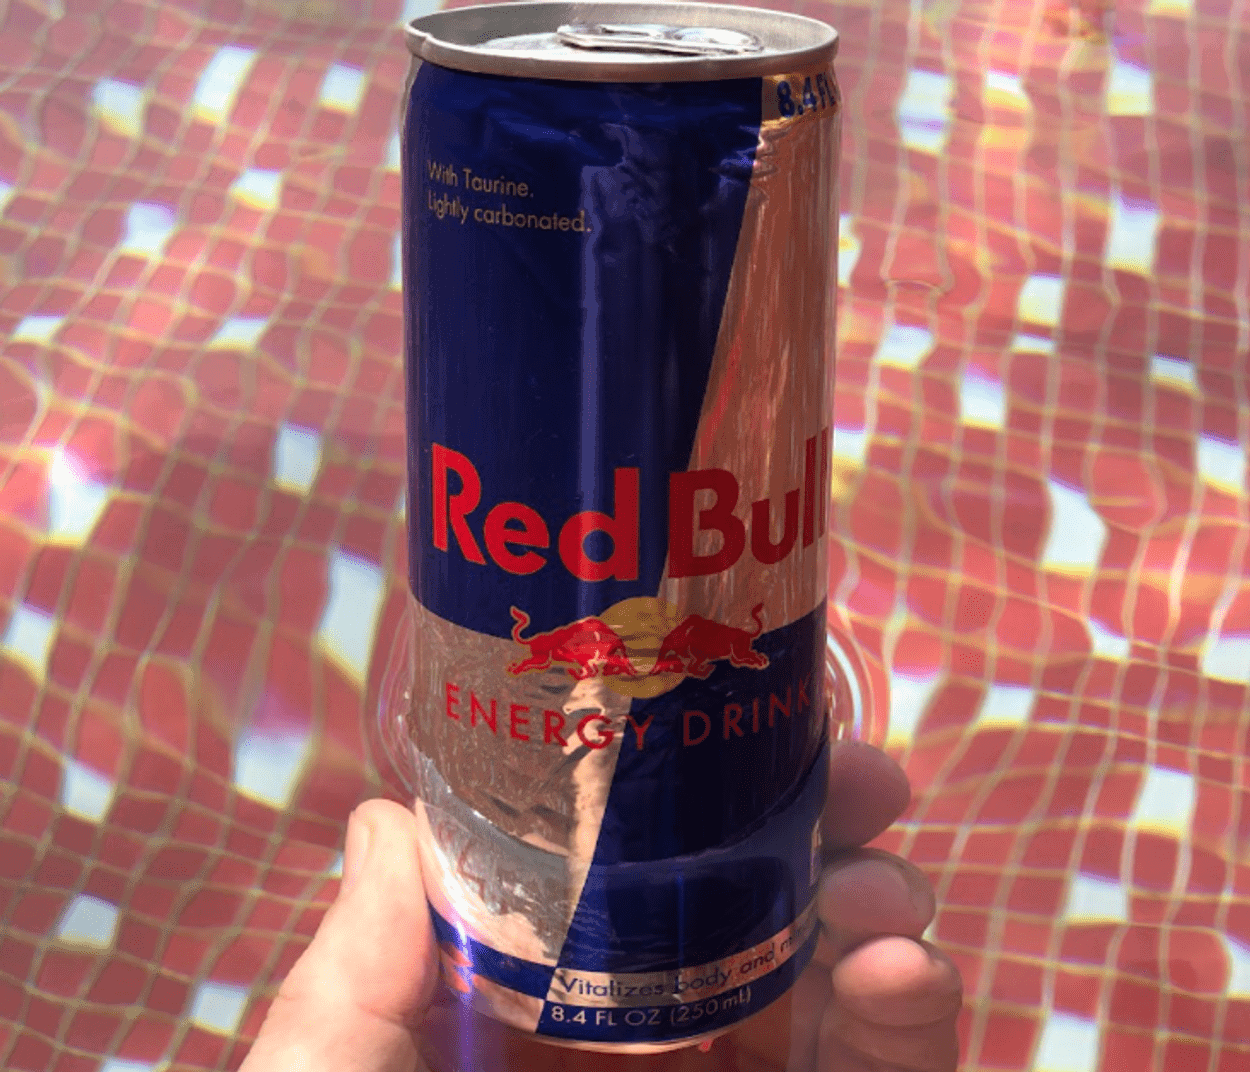 Red Bull is a decent energy drink and it combines two natural ingredients, Taurine and Glucuronolactone.